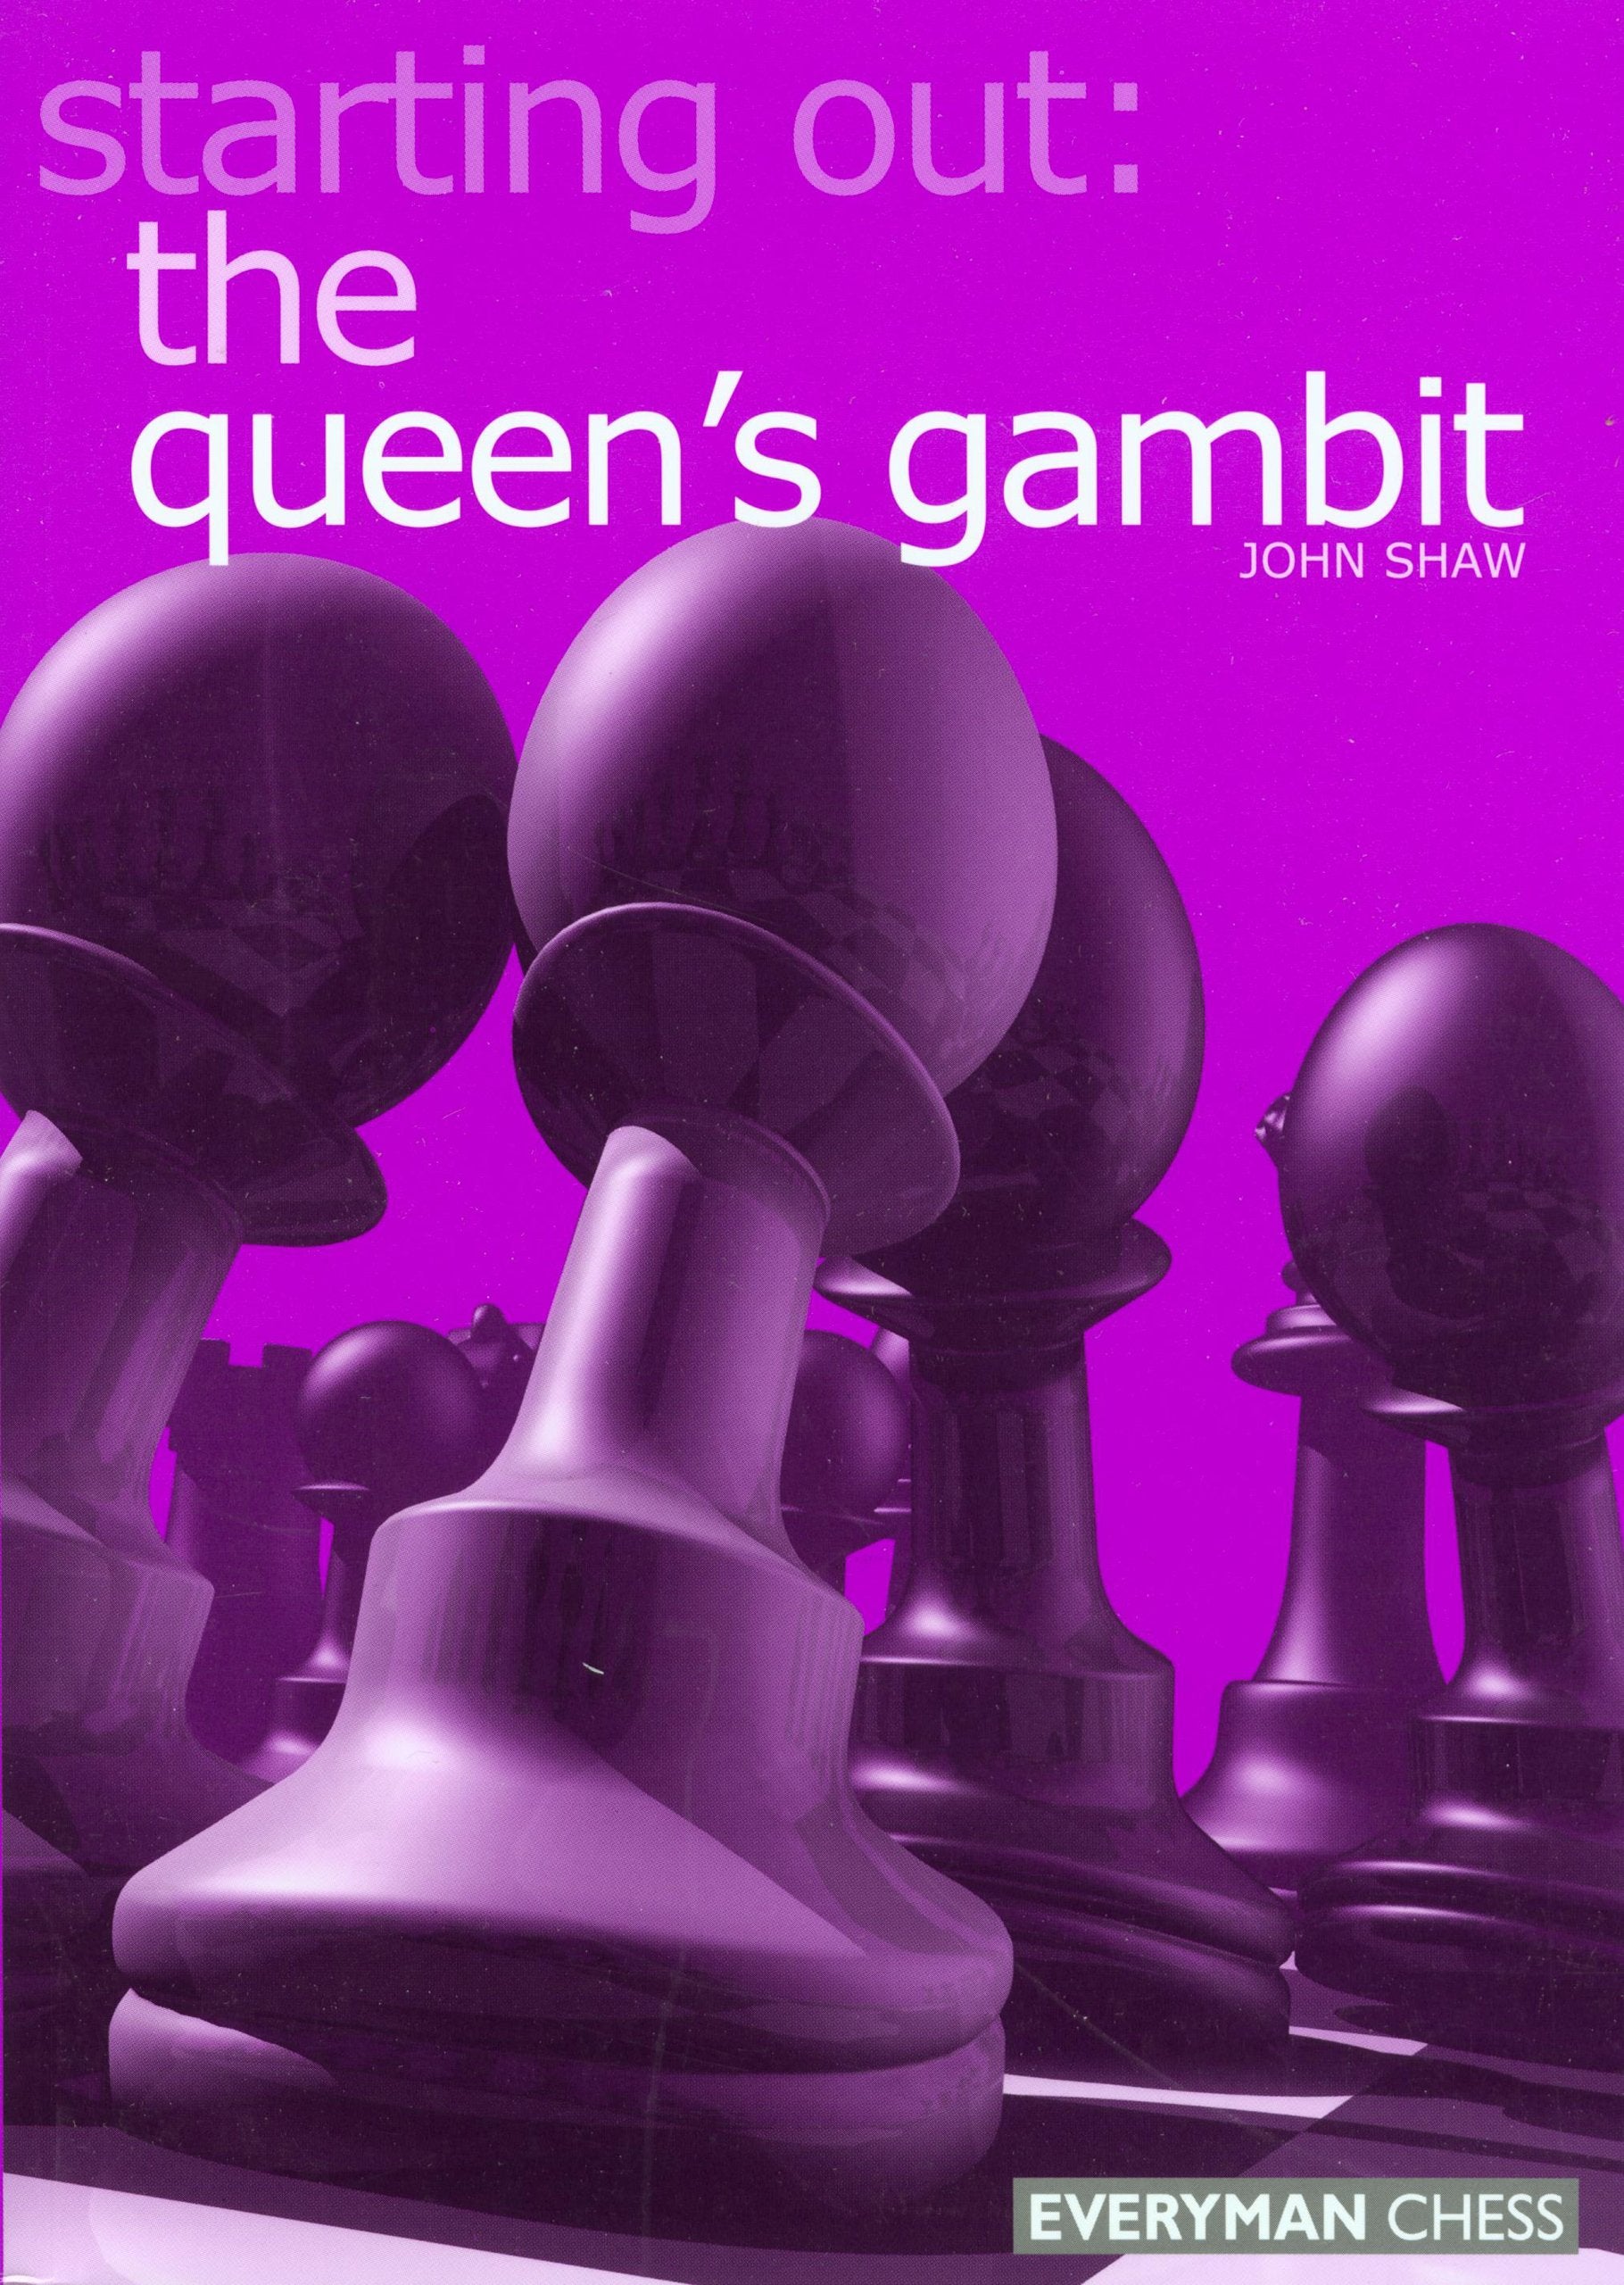 McDonnell Gambit Declined - Kings Gambit Variation 